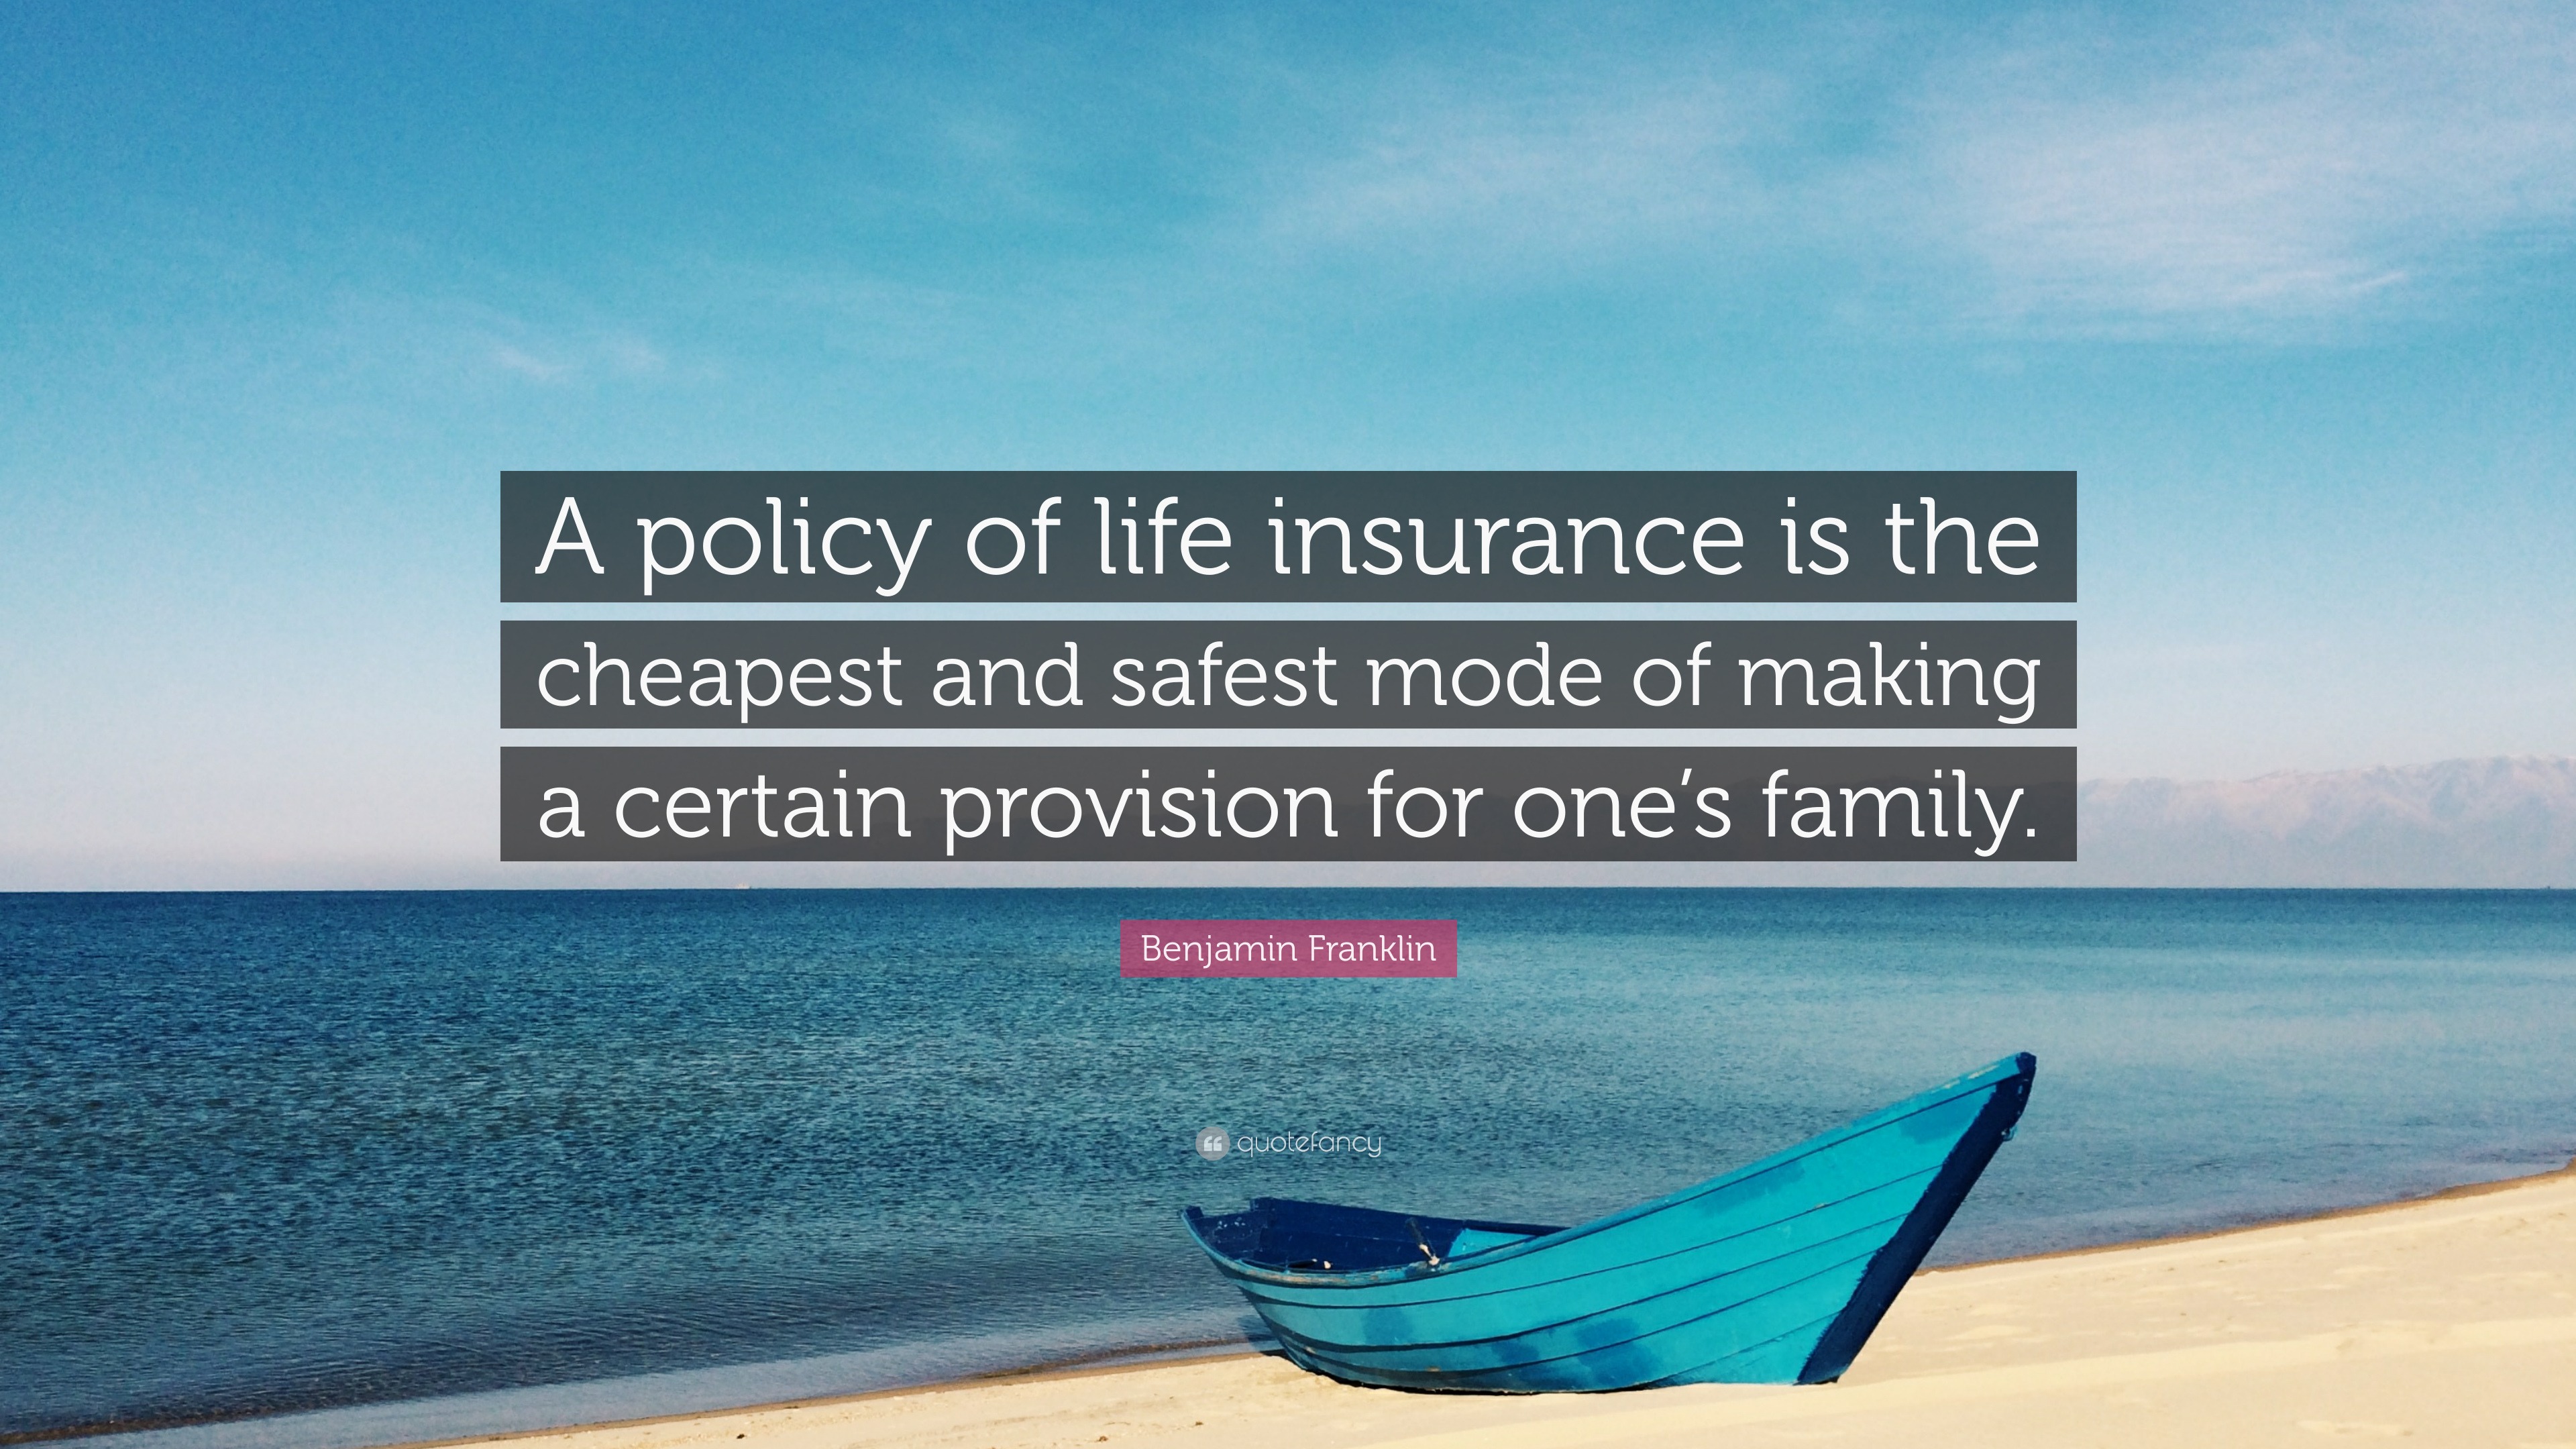 Benjamin Franklin Quote “A policy of life insurance is